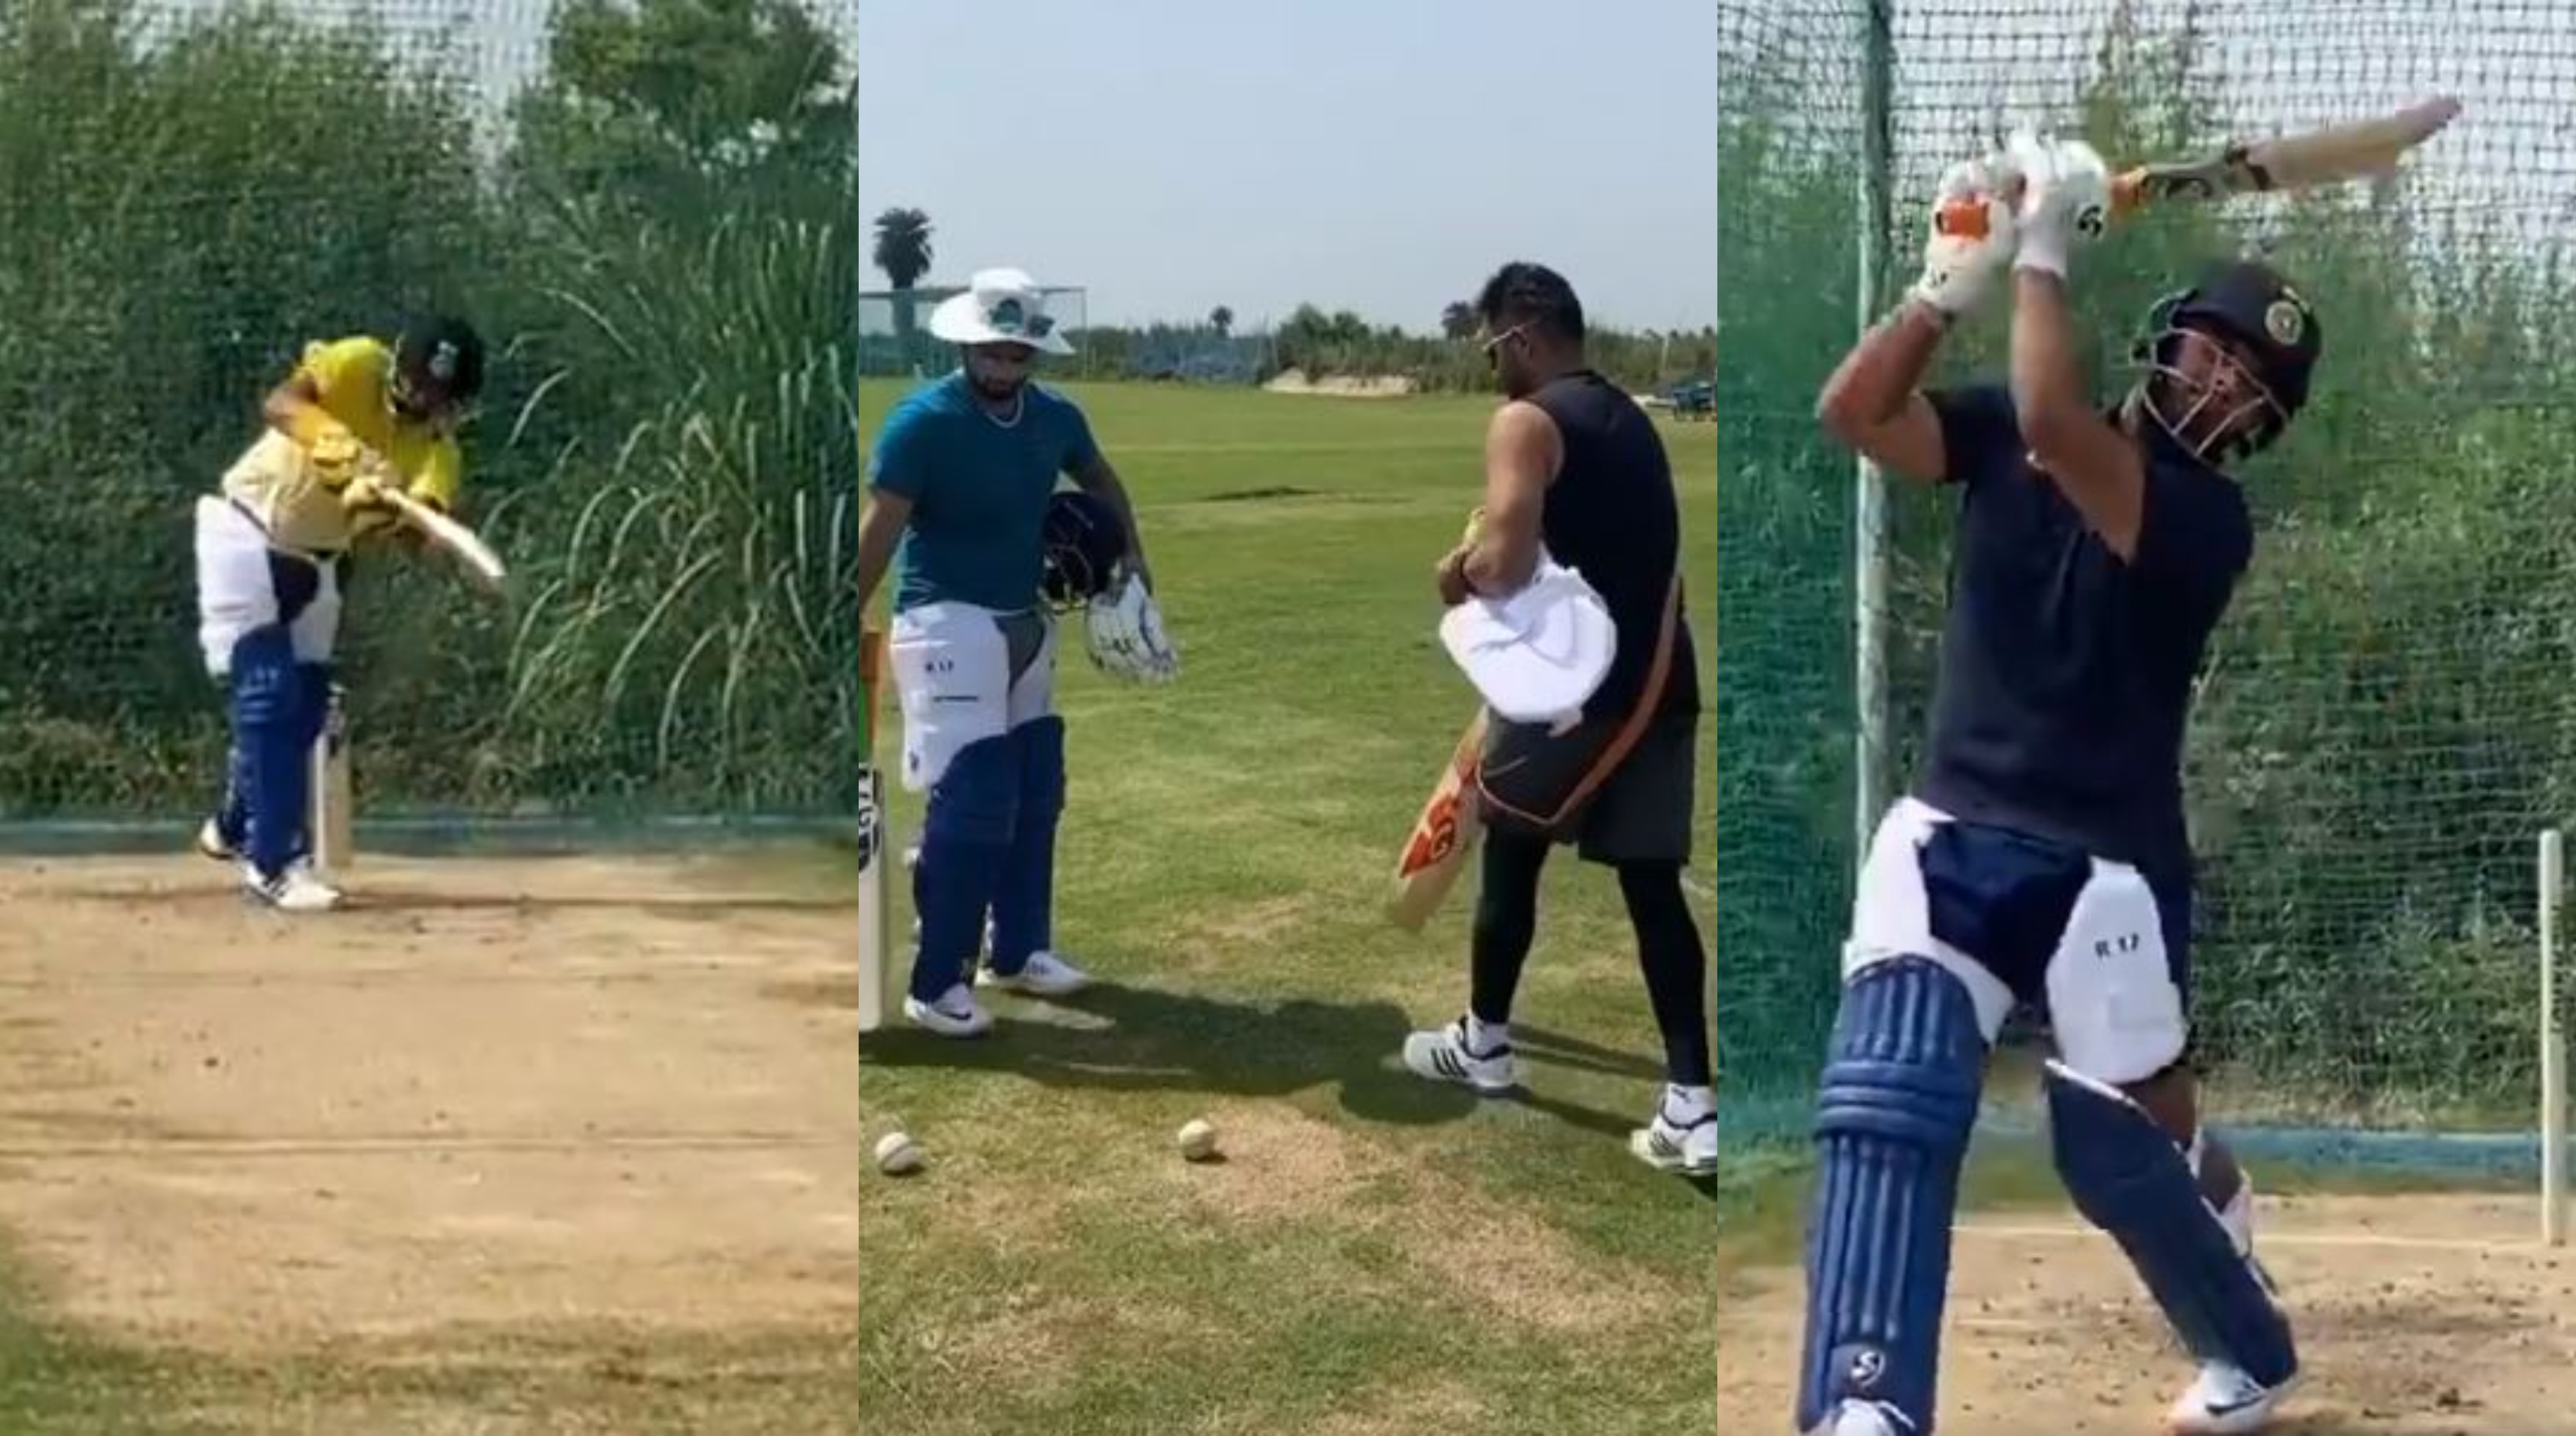 Suresh Raina and Rishabh Pant were seen practicing in Ghaziabad together